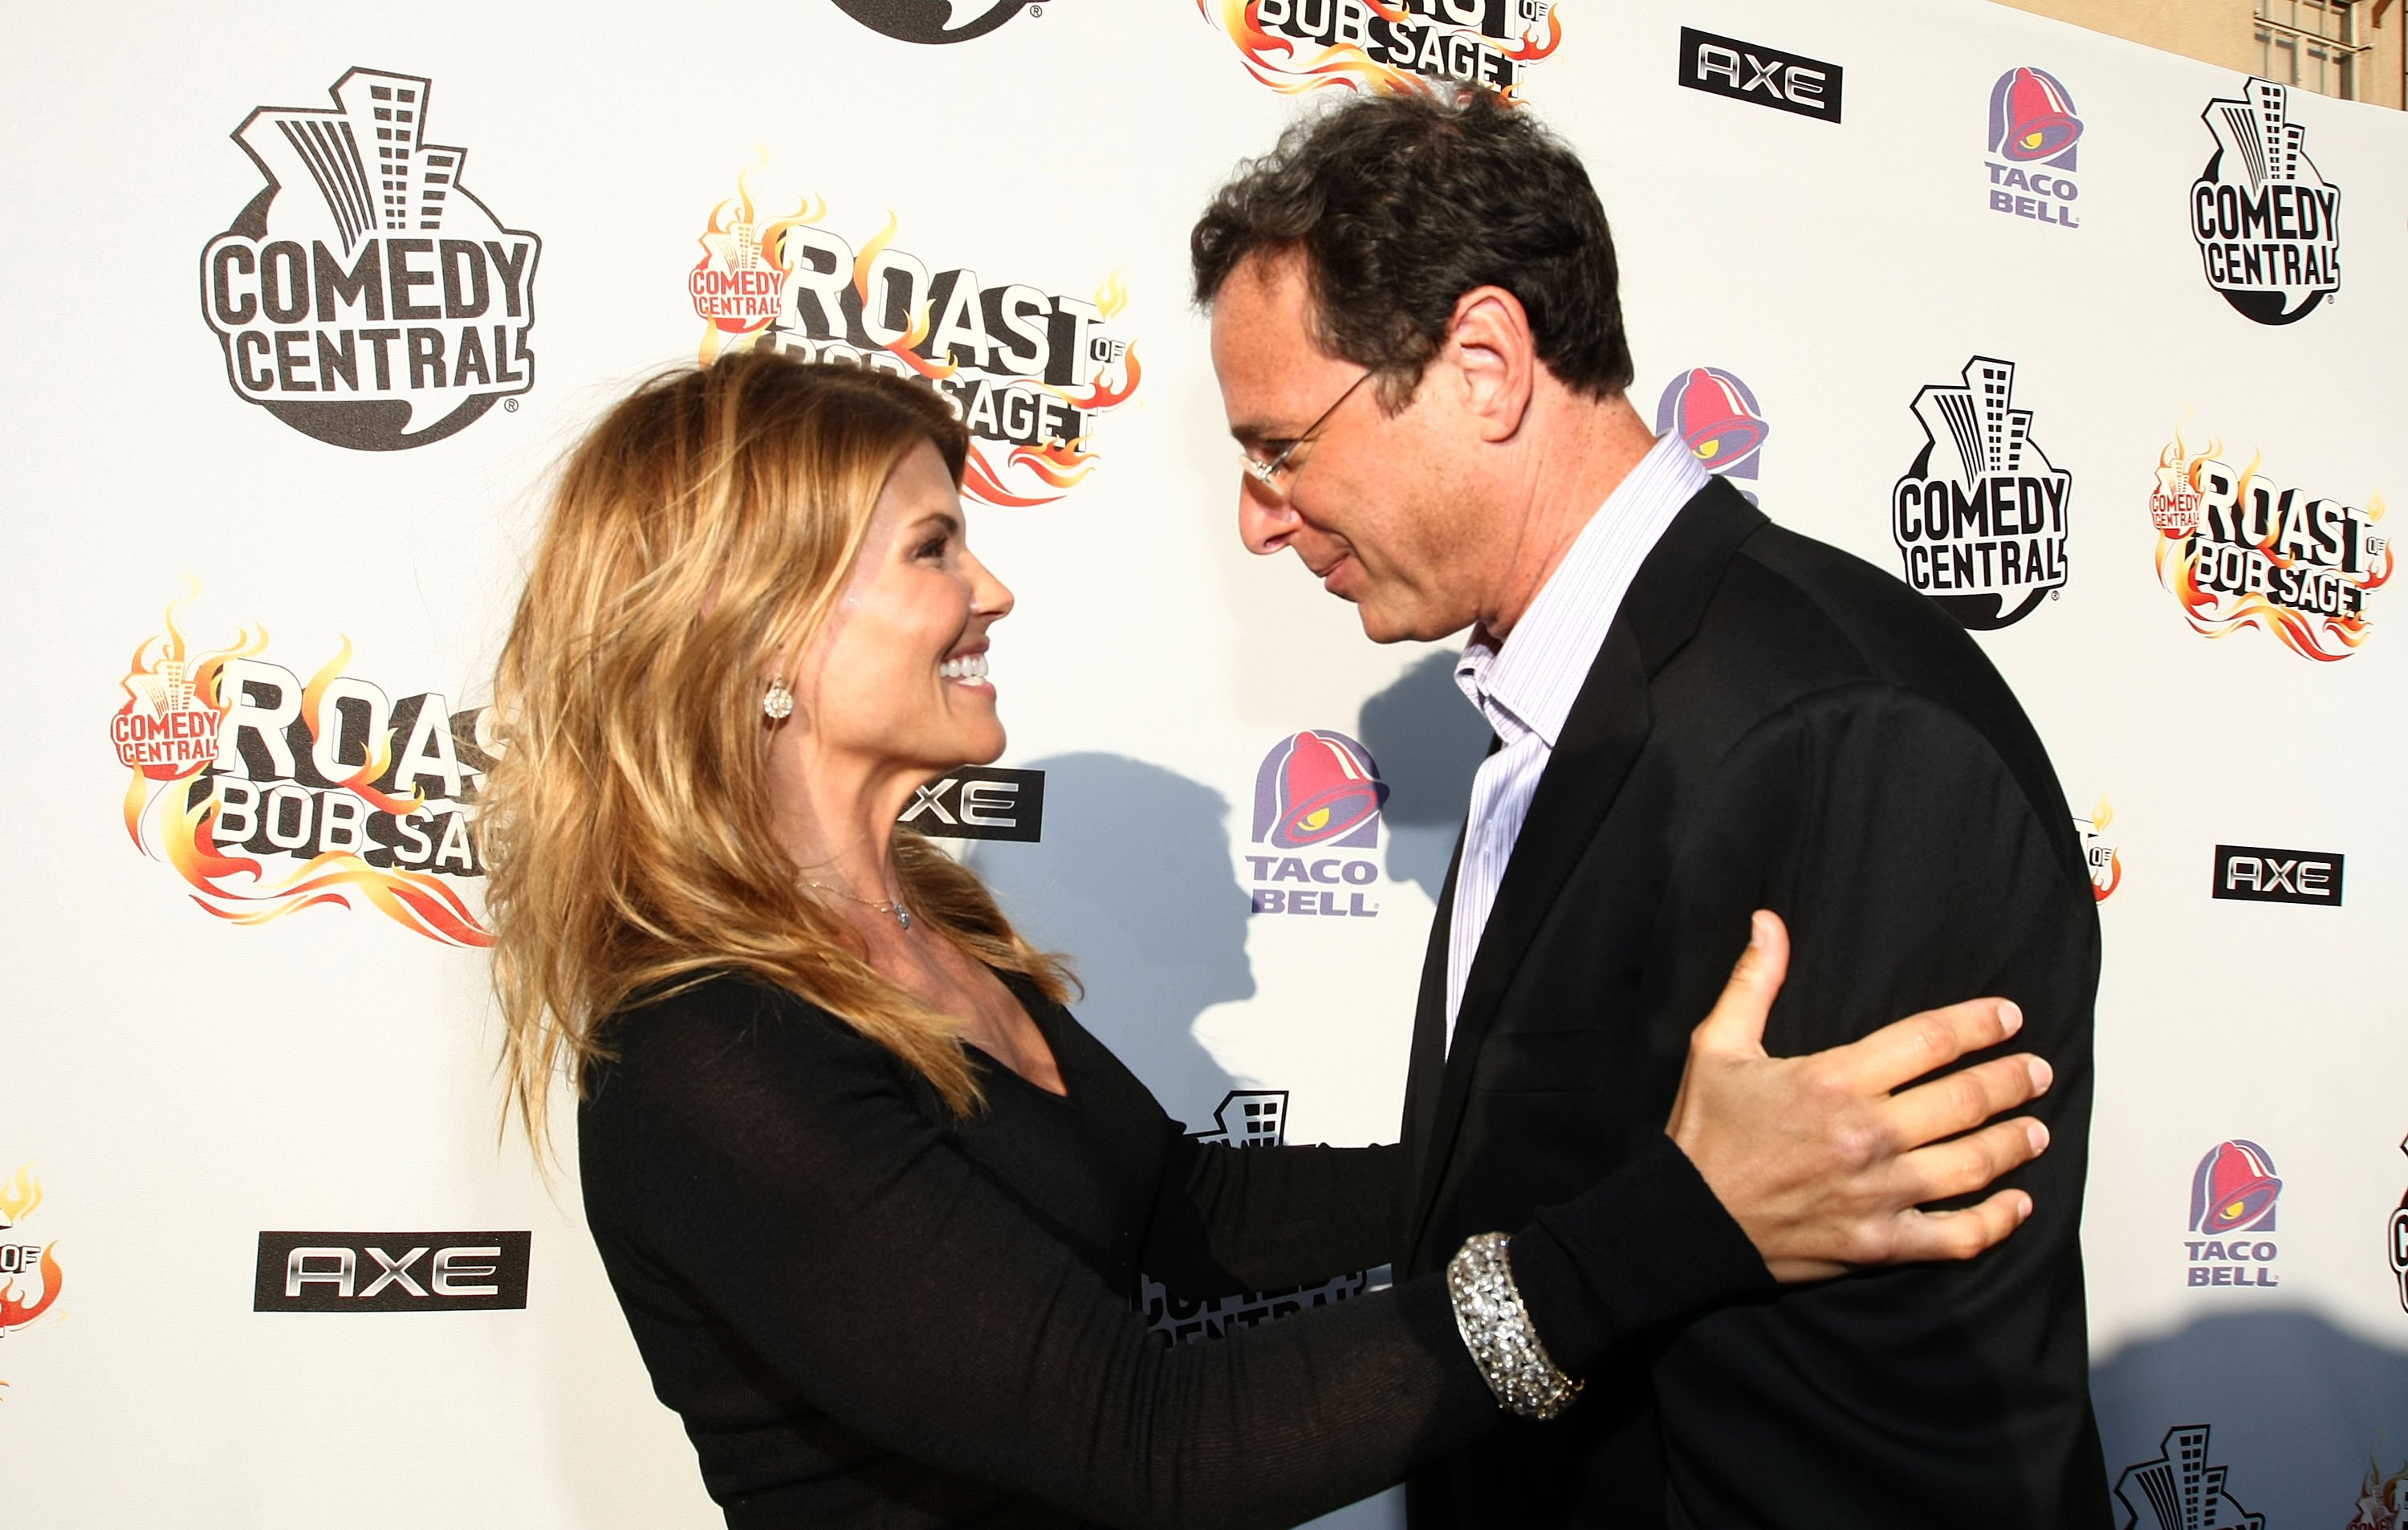 Lori Loughlin and Bob Saget smiling at each other